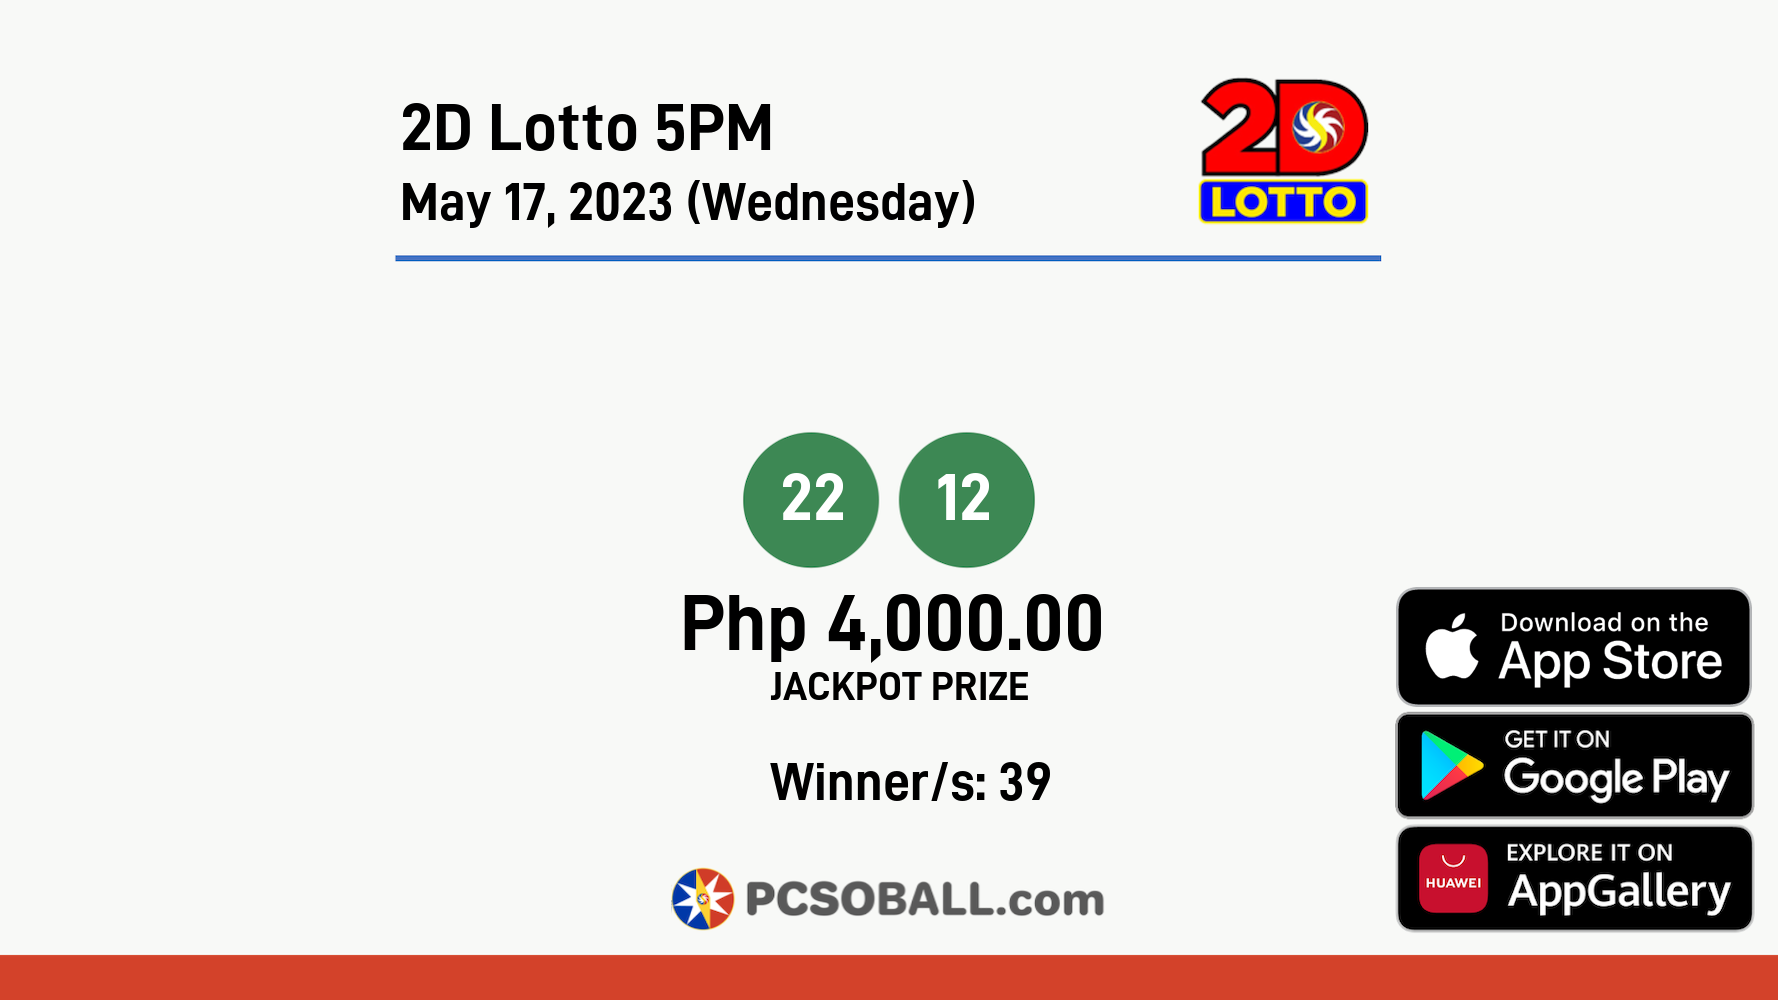 2D Lotto 5PM May 17, 2023 (Wednesday) Result